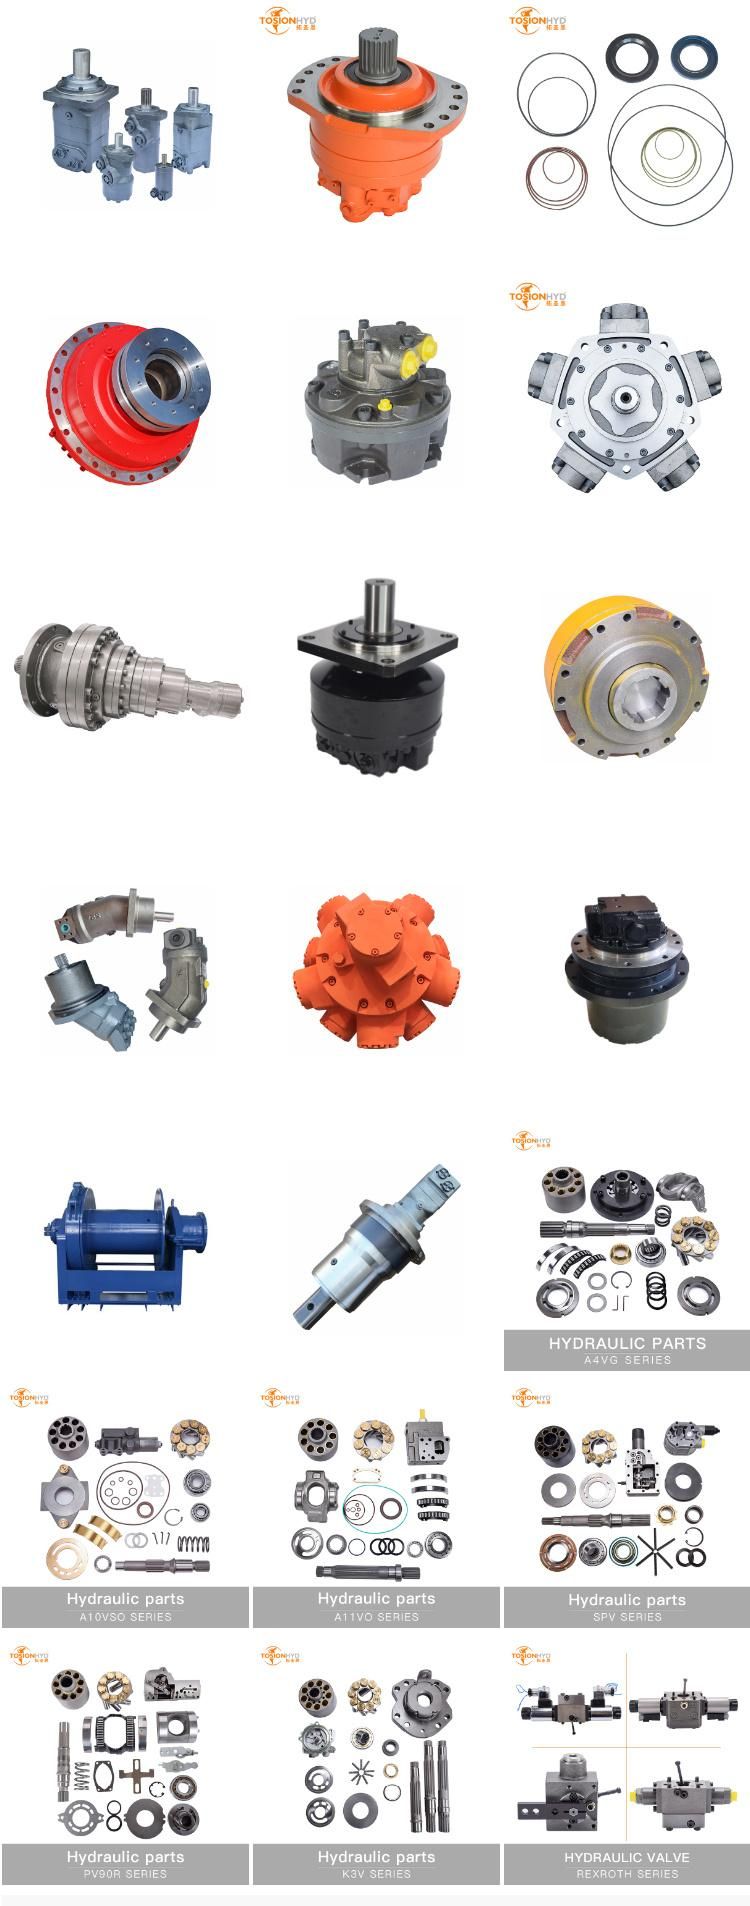 A2FM125 A2FM160 Hydraulic Motor Parts with Rexroth Spare Repair Kits